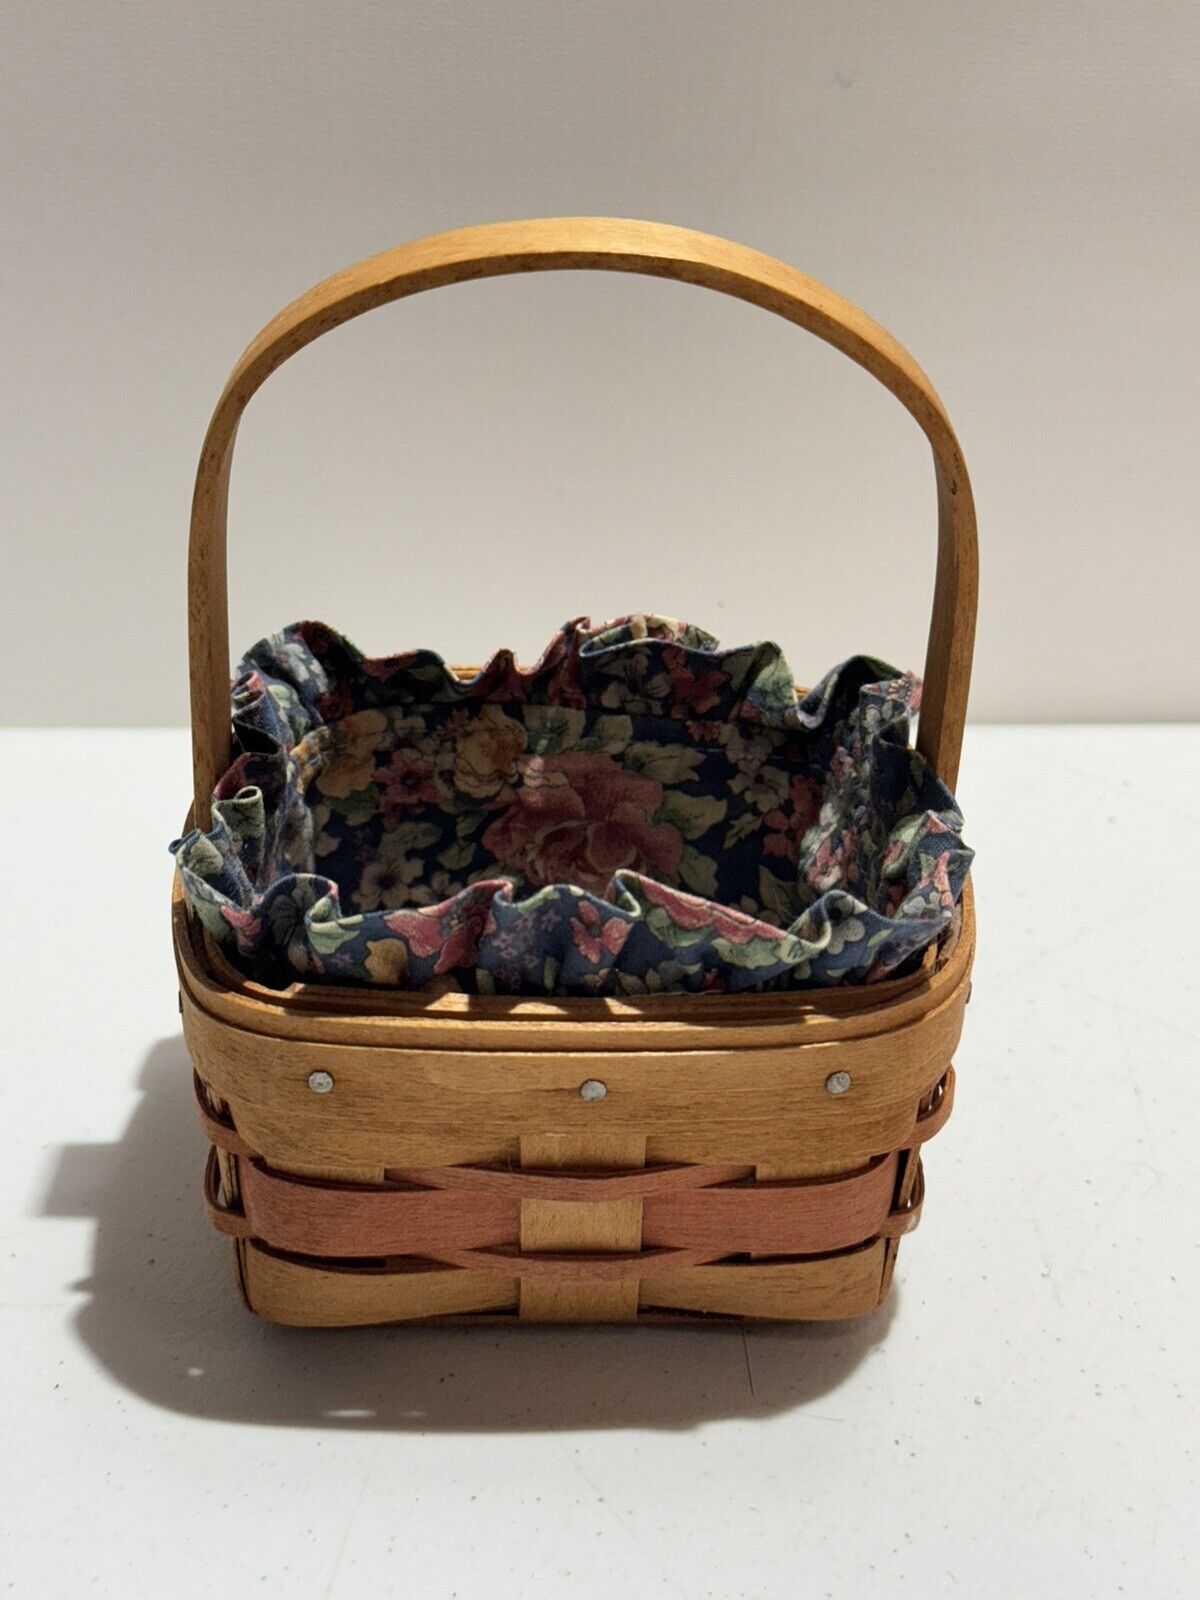 LONGABERGER SMALL BERRY BASKET BLUE FLORAL FABRIC LINER Signed 1991 HAND-WOVEN